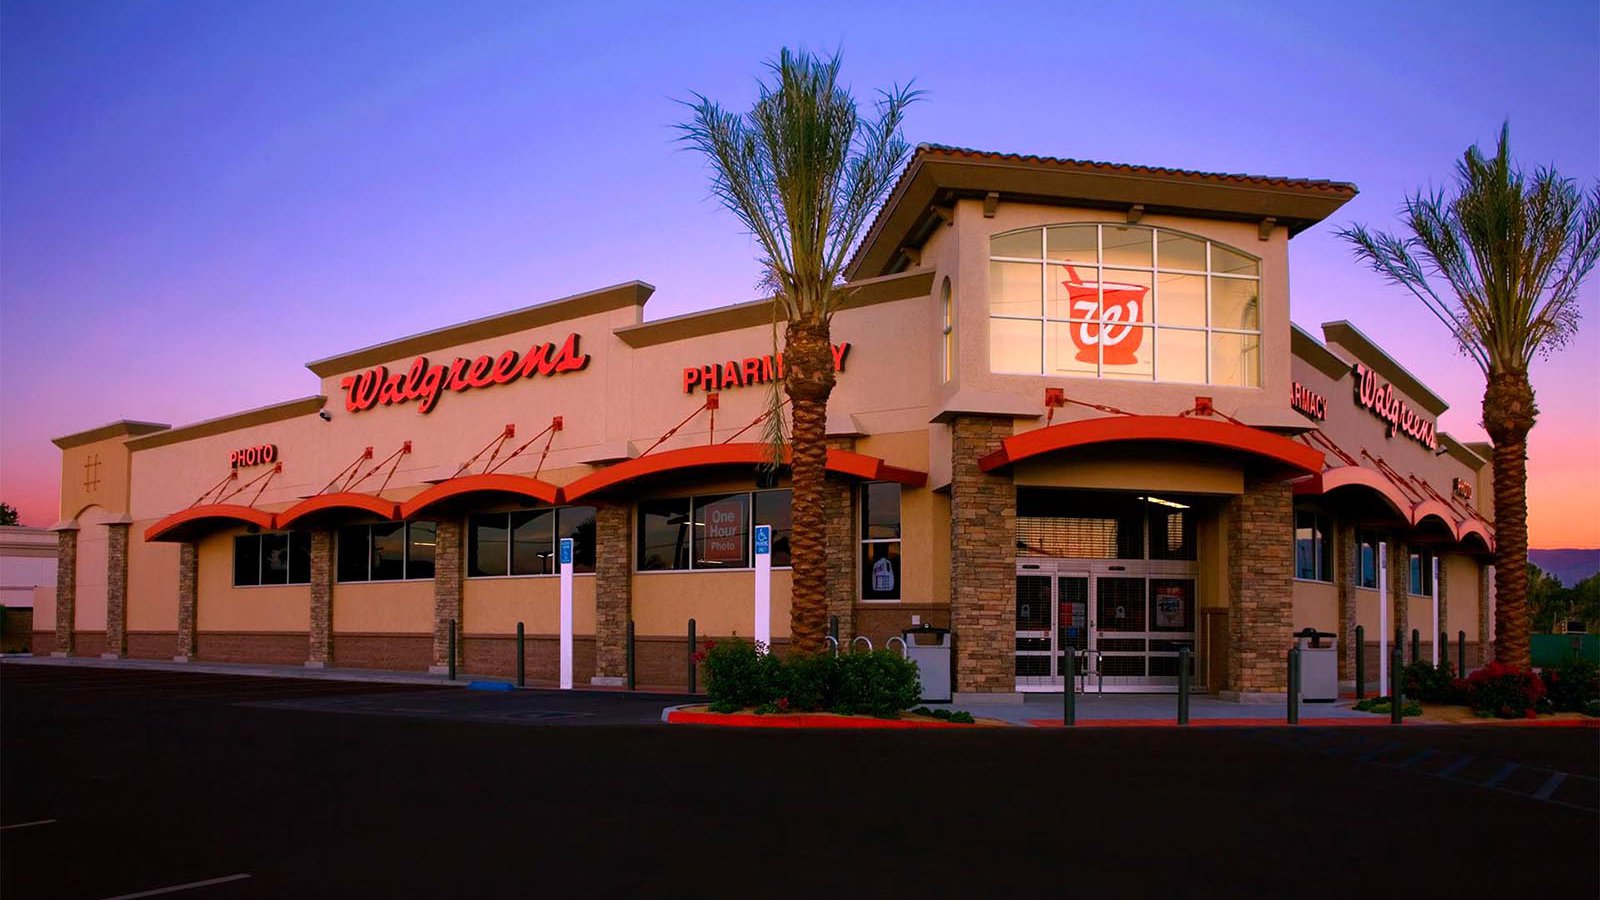 Exterior Architectural sunrise image of an Indio, California Walgreens store